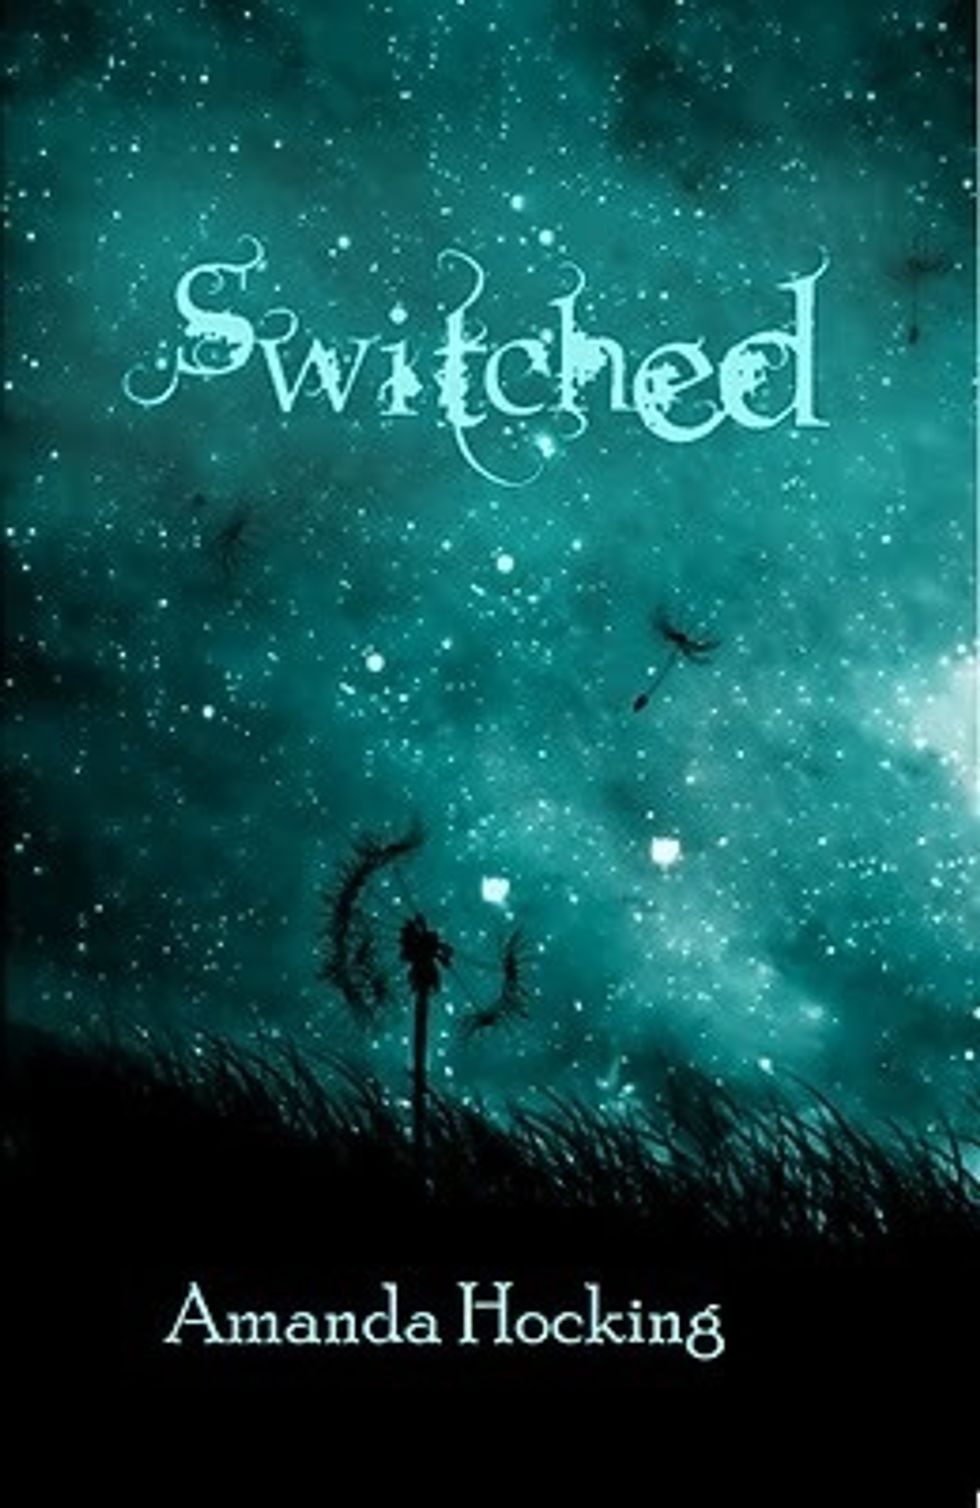 Throwback Review of Switched by Amanda Hocking